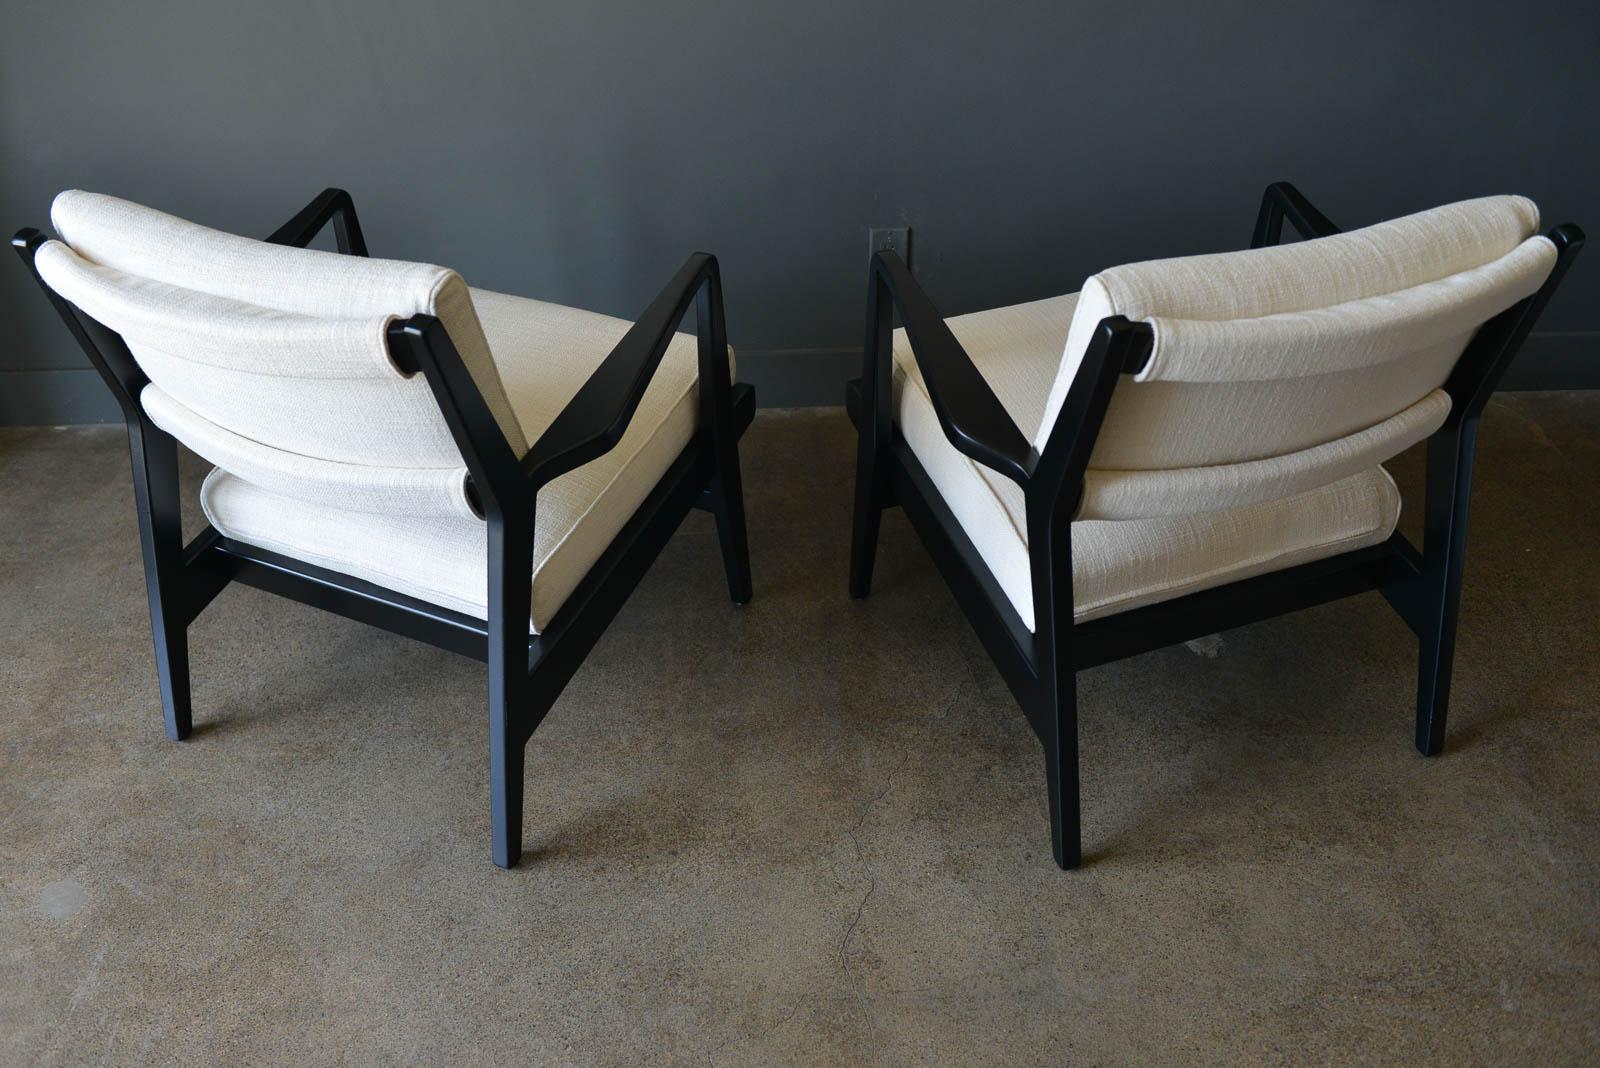 Mid-20th Century Pair of Ebonized Lounge Chairs by Jens Risom, ca. 1965